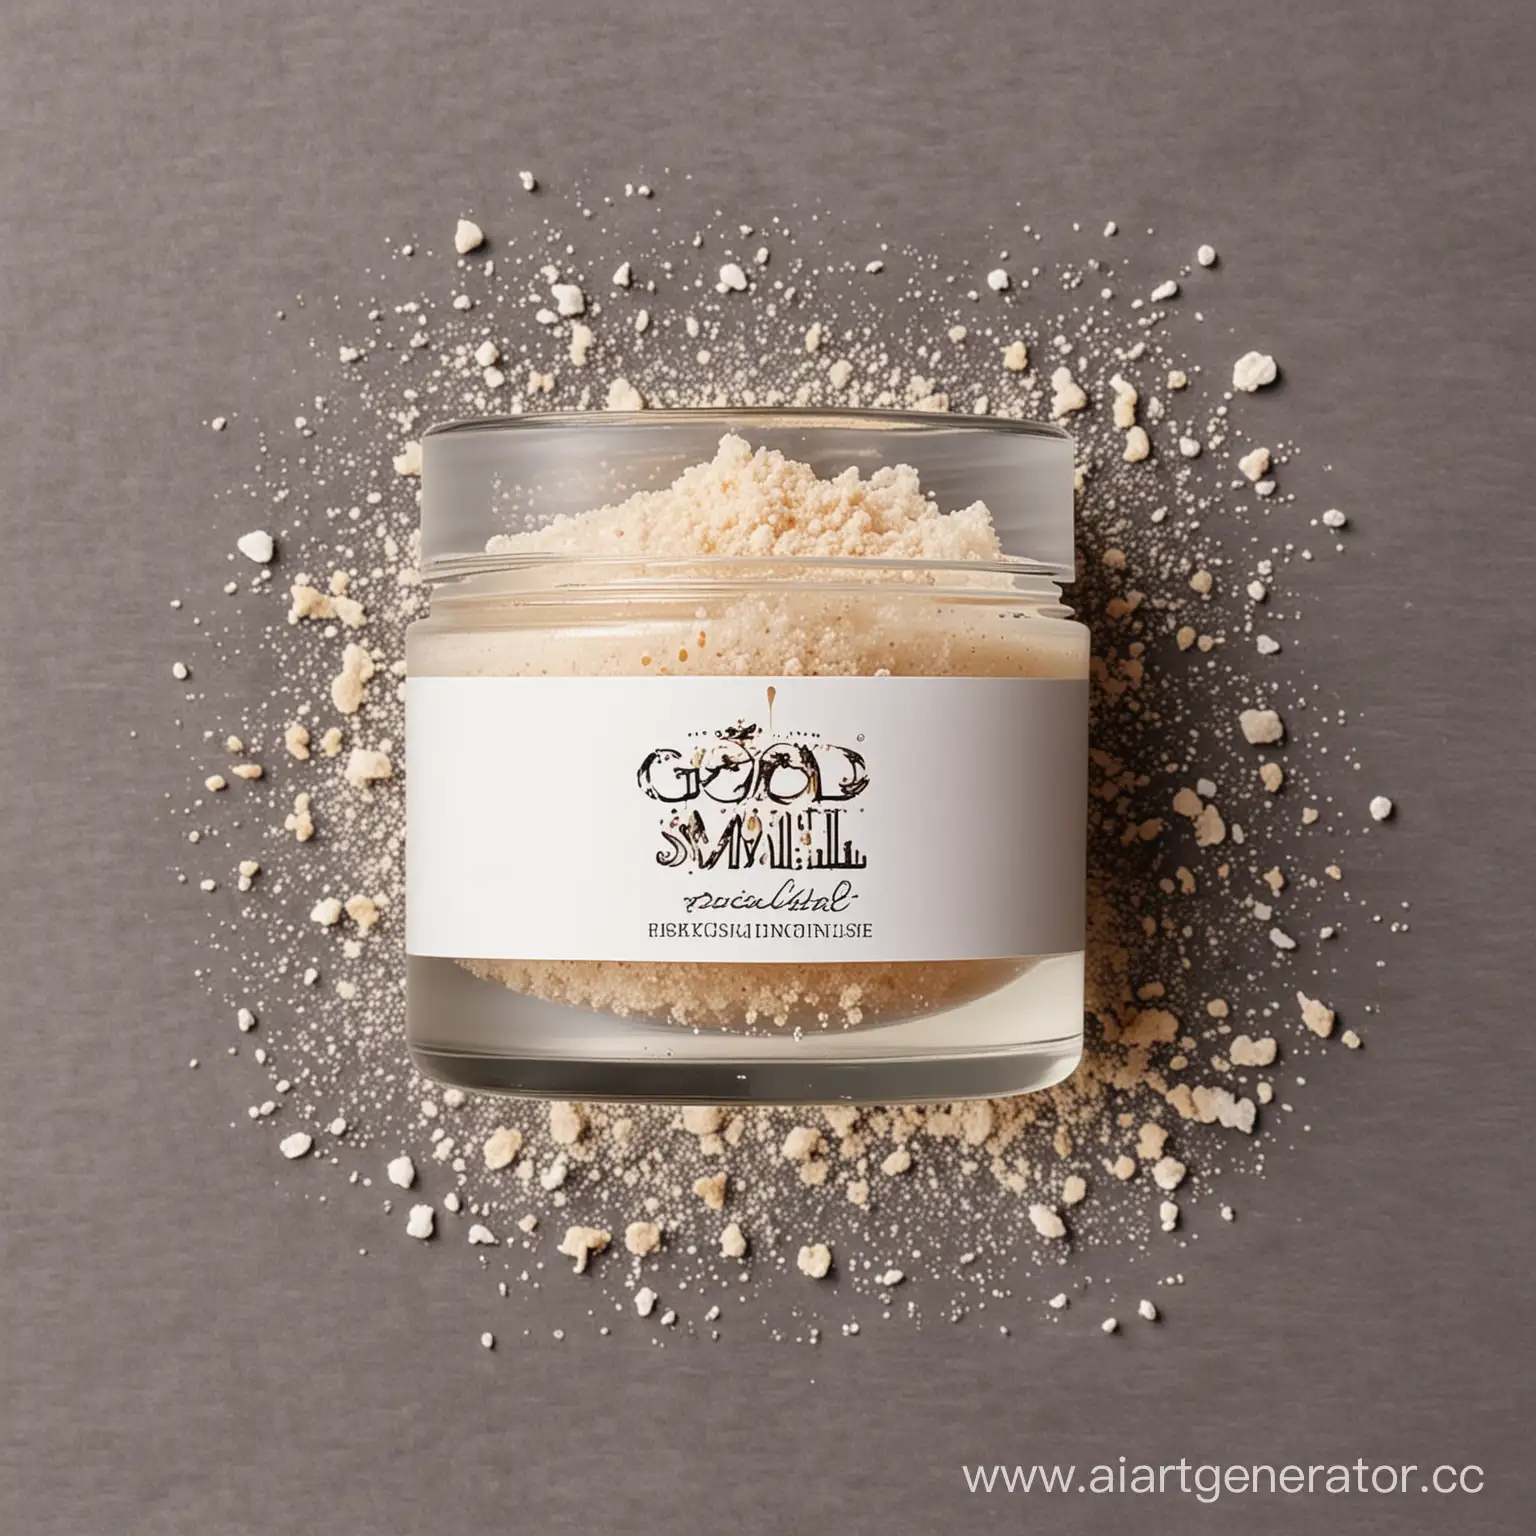 Refreshing-Exfoliation-Experience-with-Good-Smell-Products